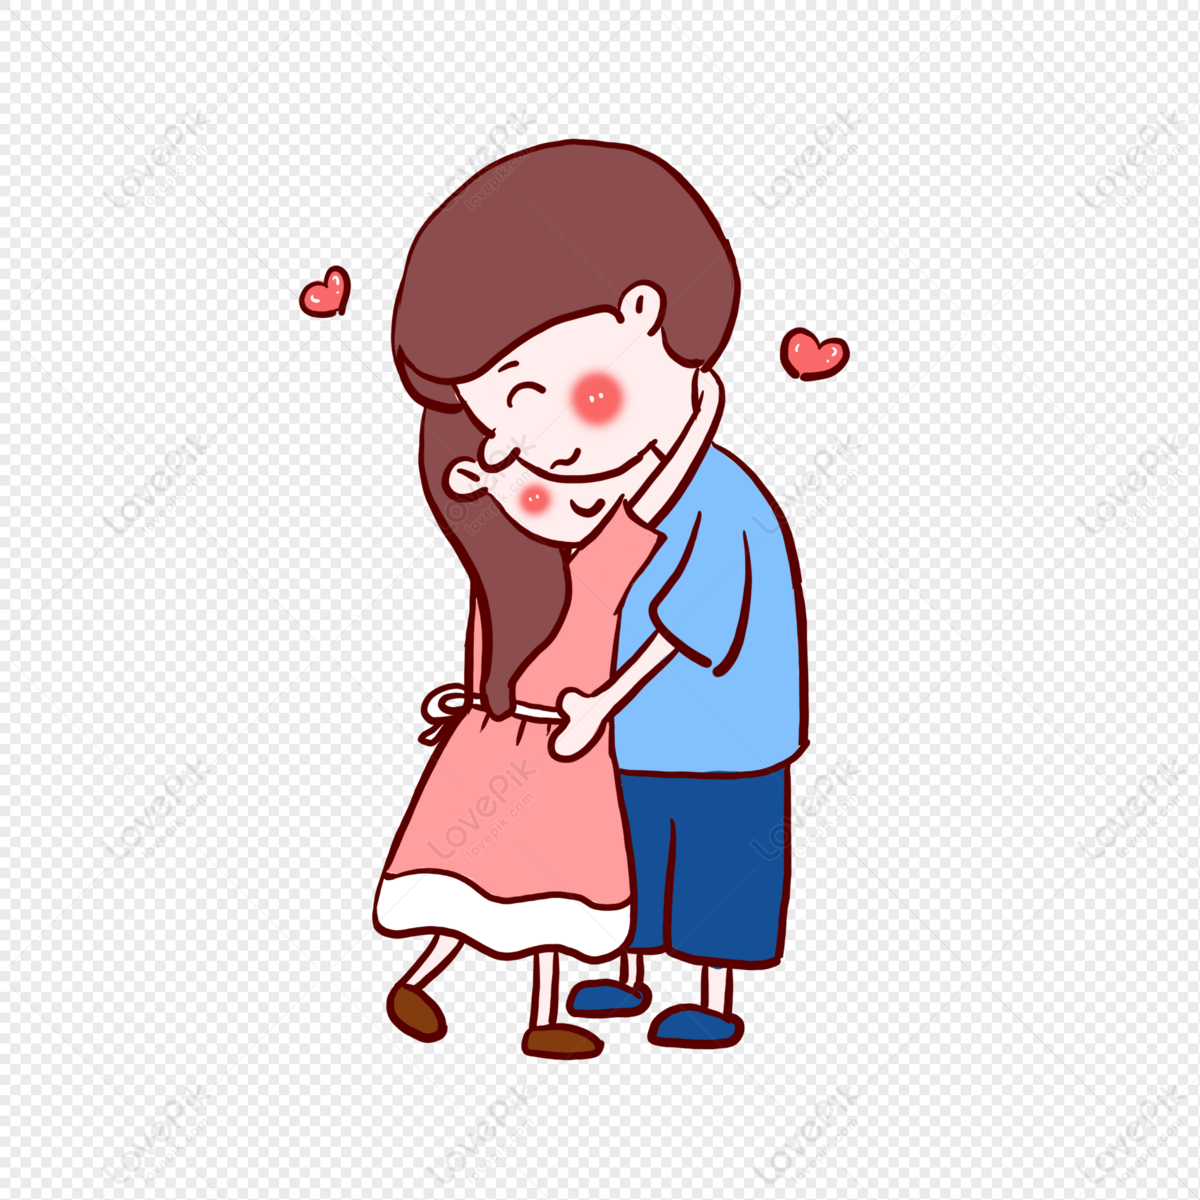 Couple Hugging Cartoon Character PNG Transparent Image And Clipart Image  For Free Download - Lovepik | 401293727